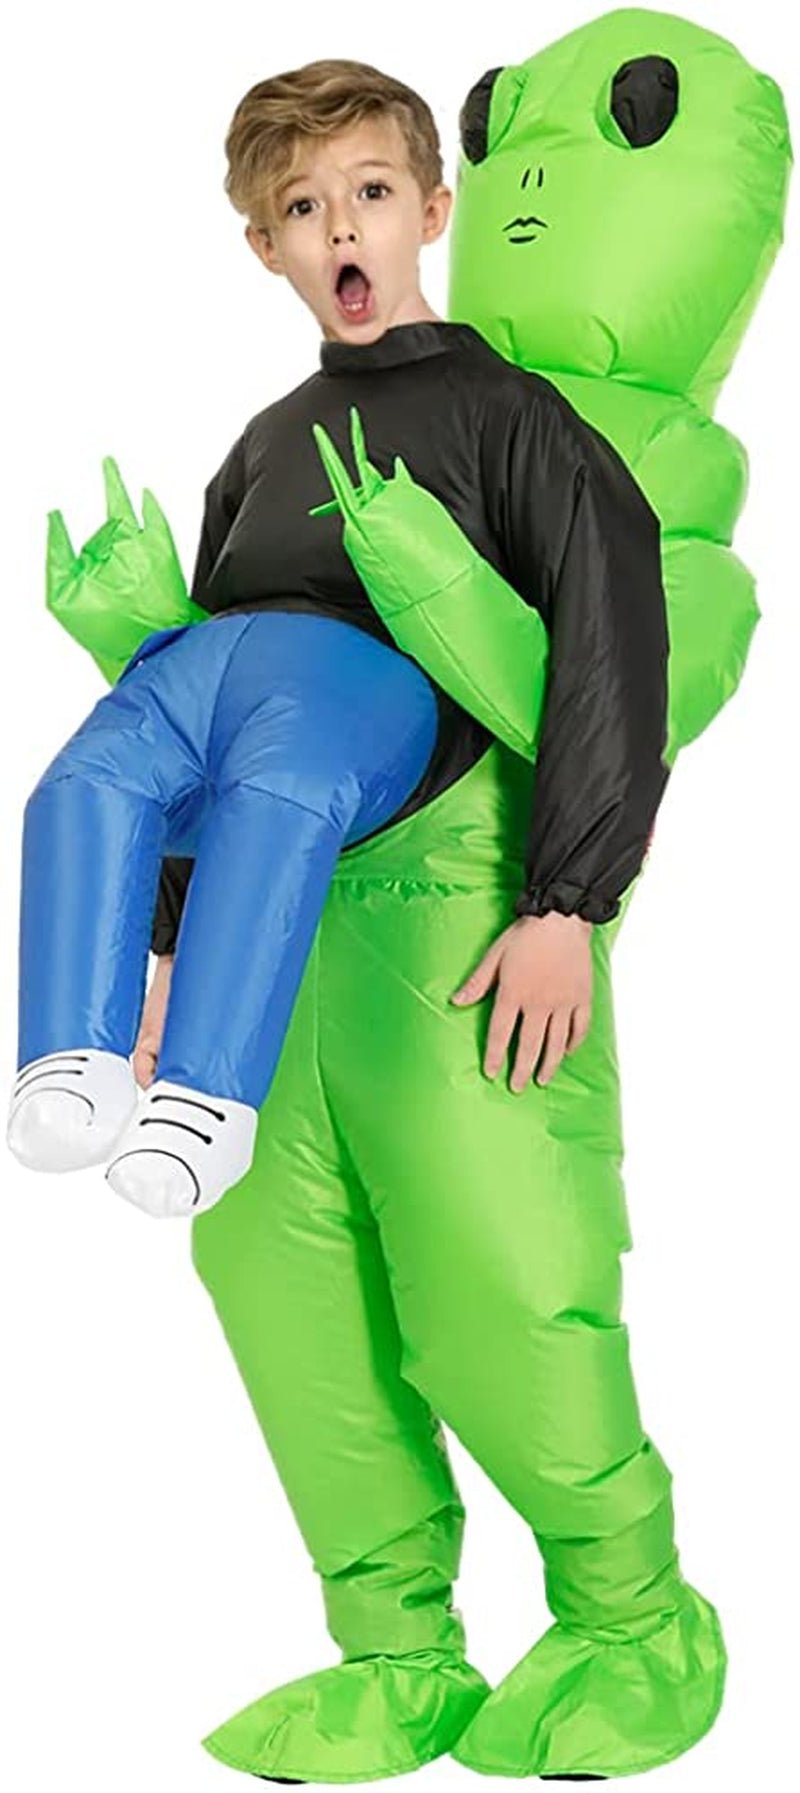 Poptrend Inflatable Alien Costume Inflatable Halloween Costumes Blow up Alien Costume for Halloween, Easter,Christmas…  Poptrend Kids Alien  